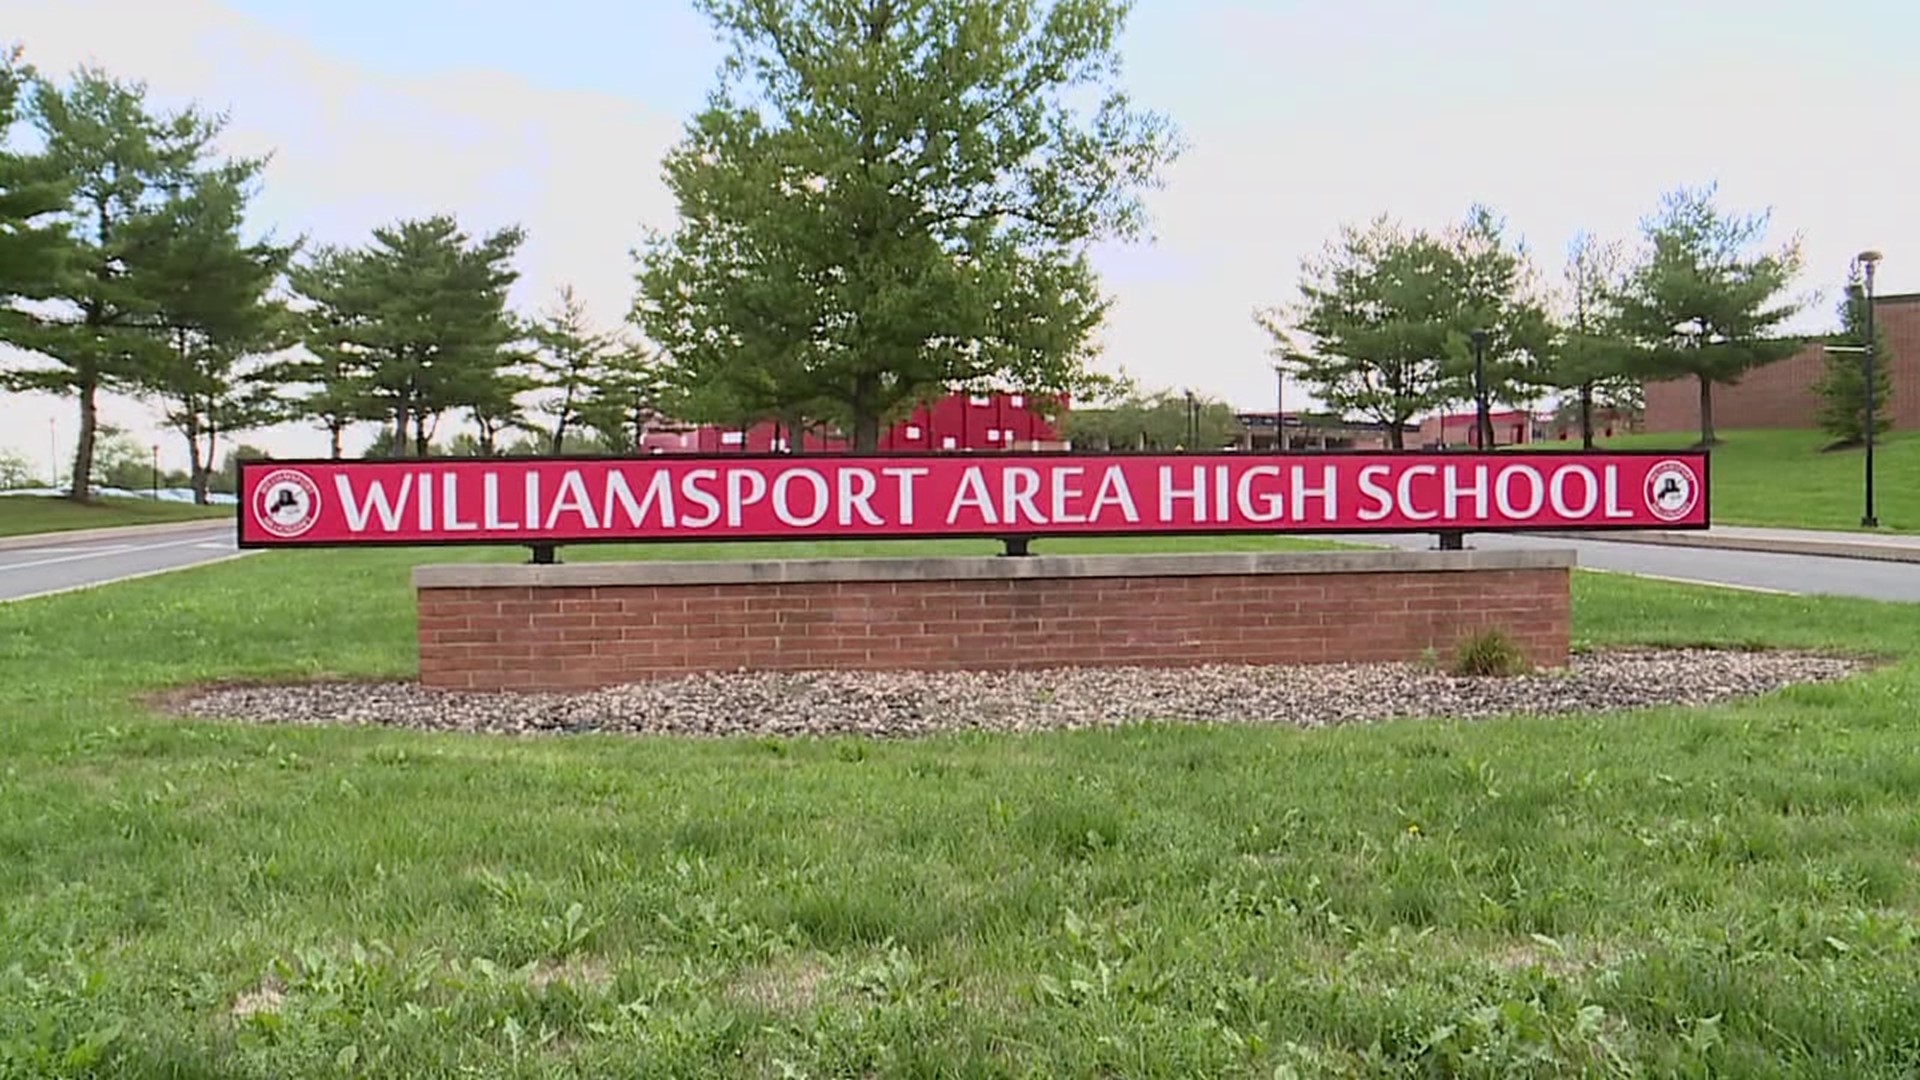 A third teacher in the Williamsport Area School District is facing sex charges. Newswatch16's Courtney Harrison talked to parents about the situation.